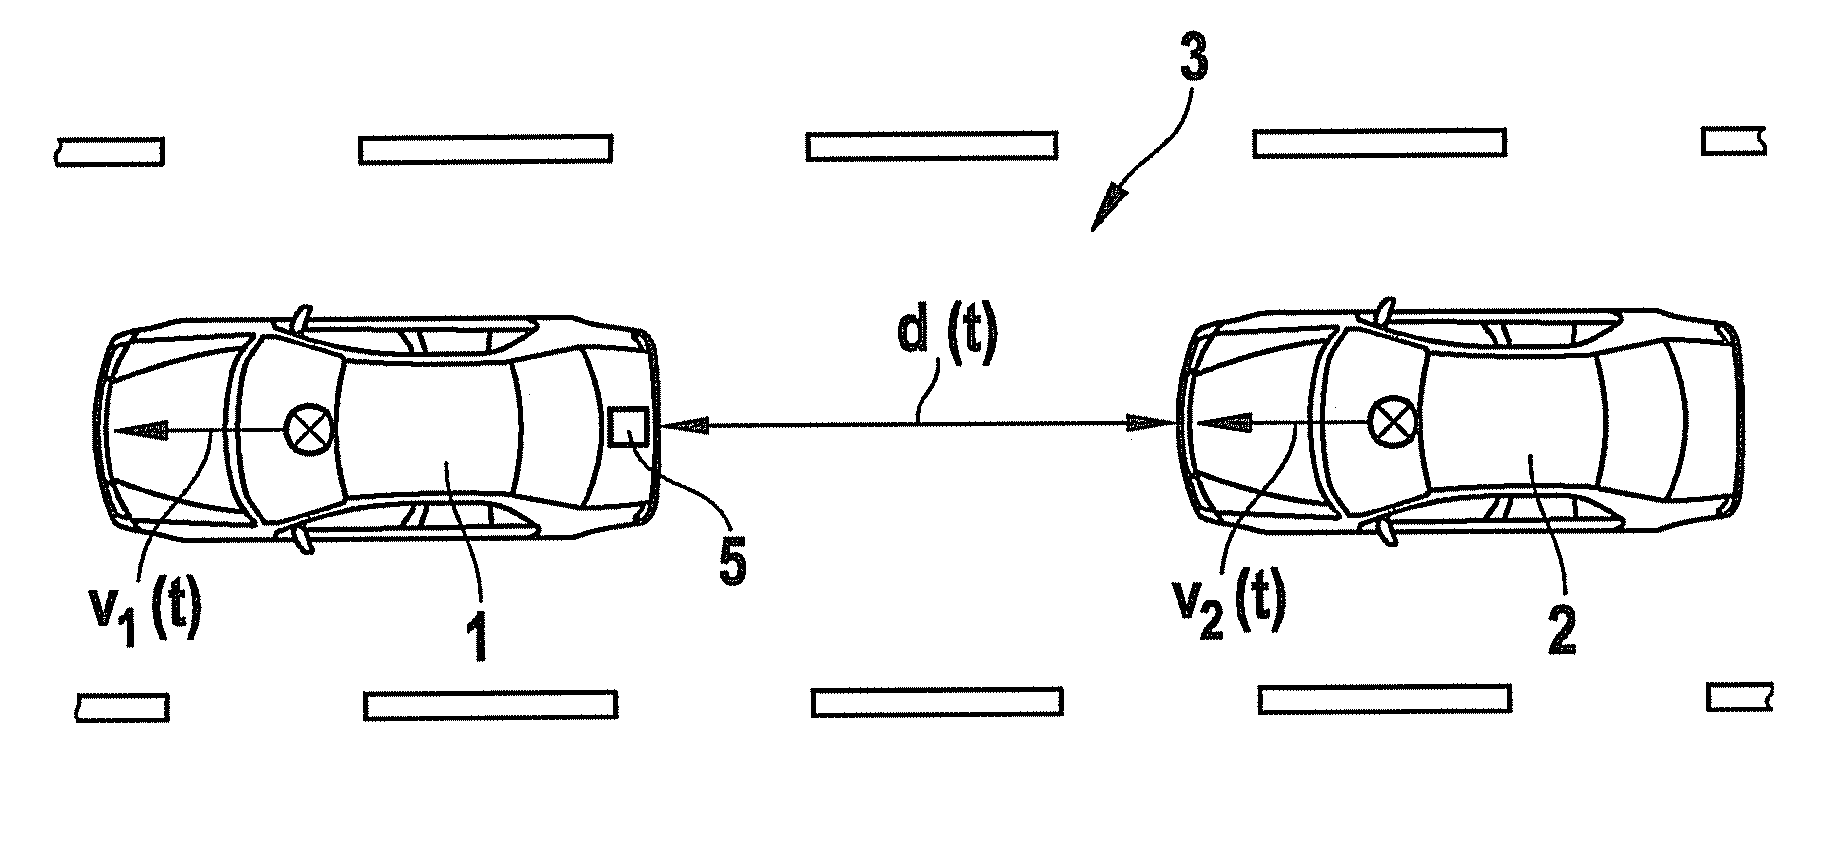 Prevention of a rear crash during an automatic braking intervention by a vehicle safety system